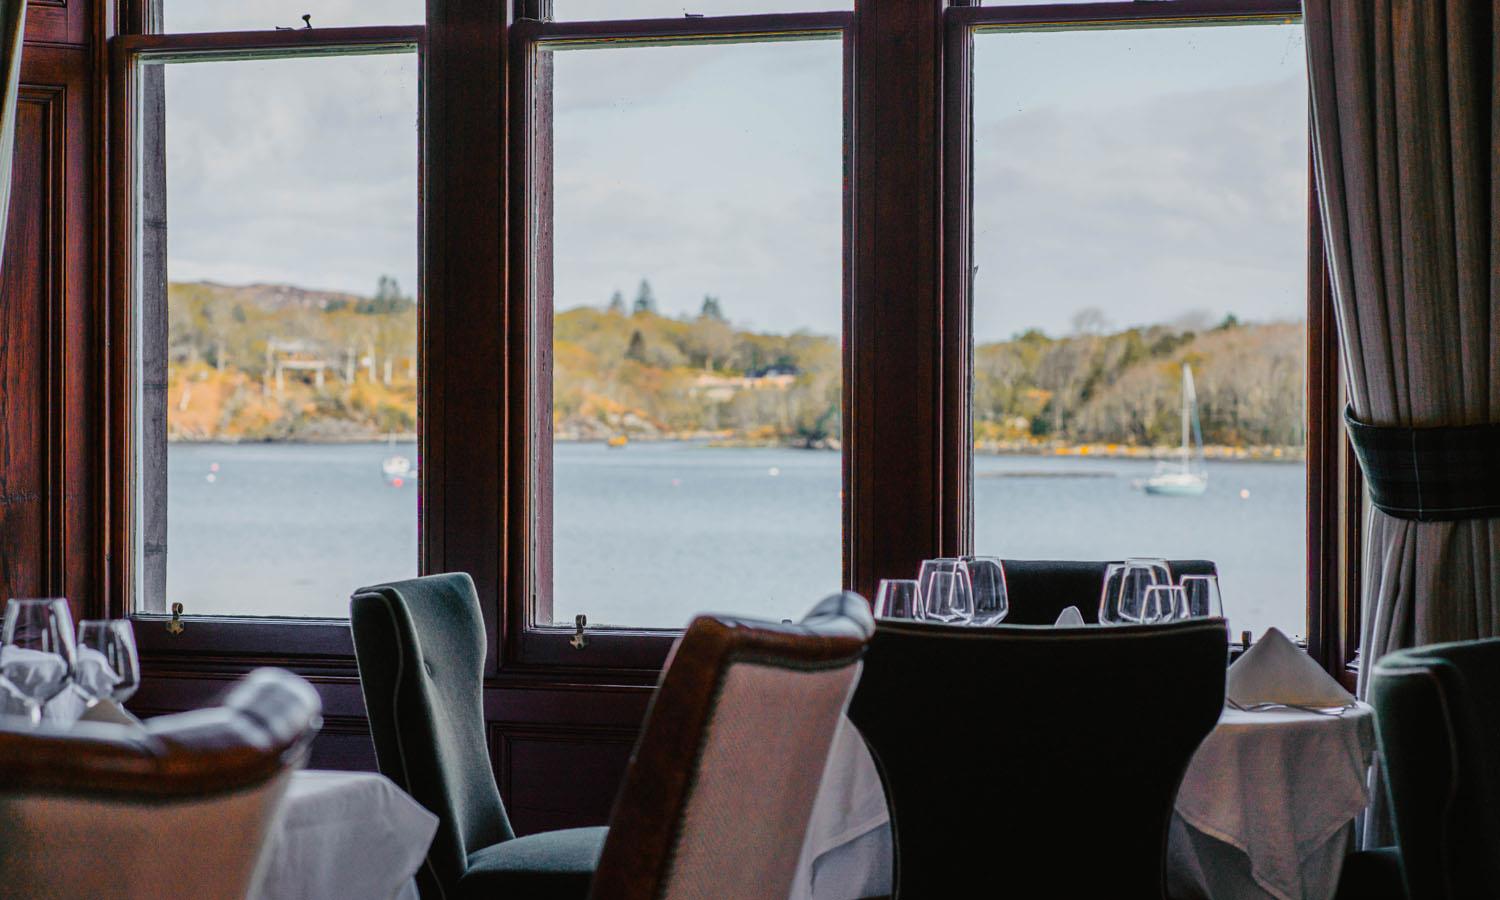 The Loch-View Restaurant offers fine dining and fine views